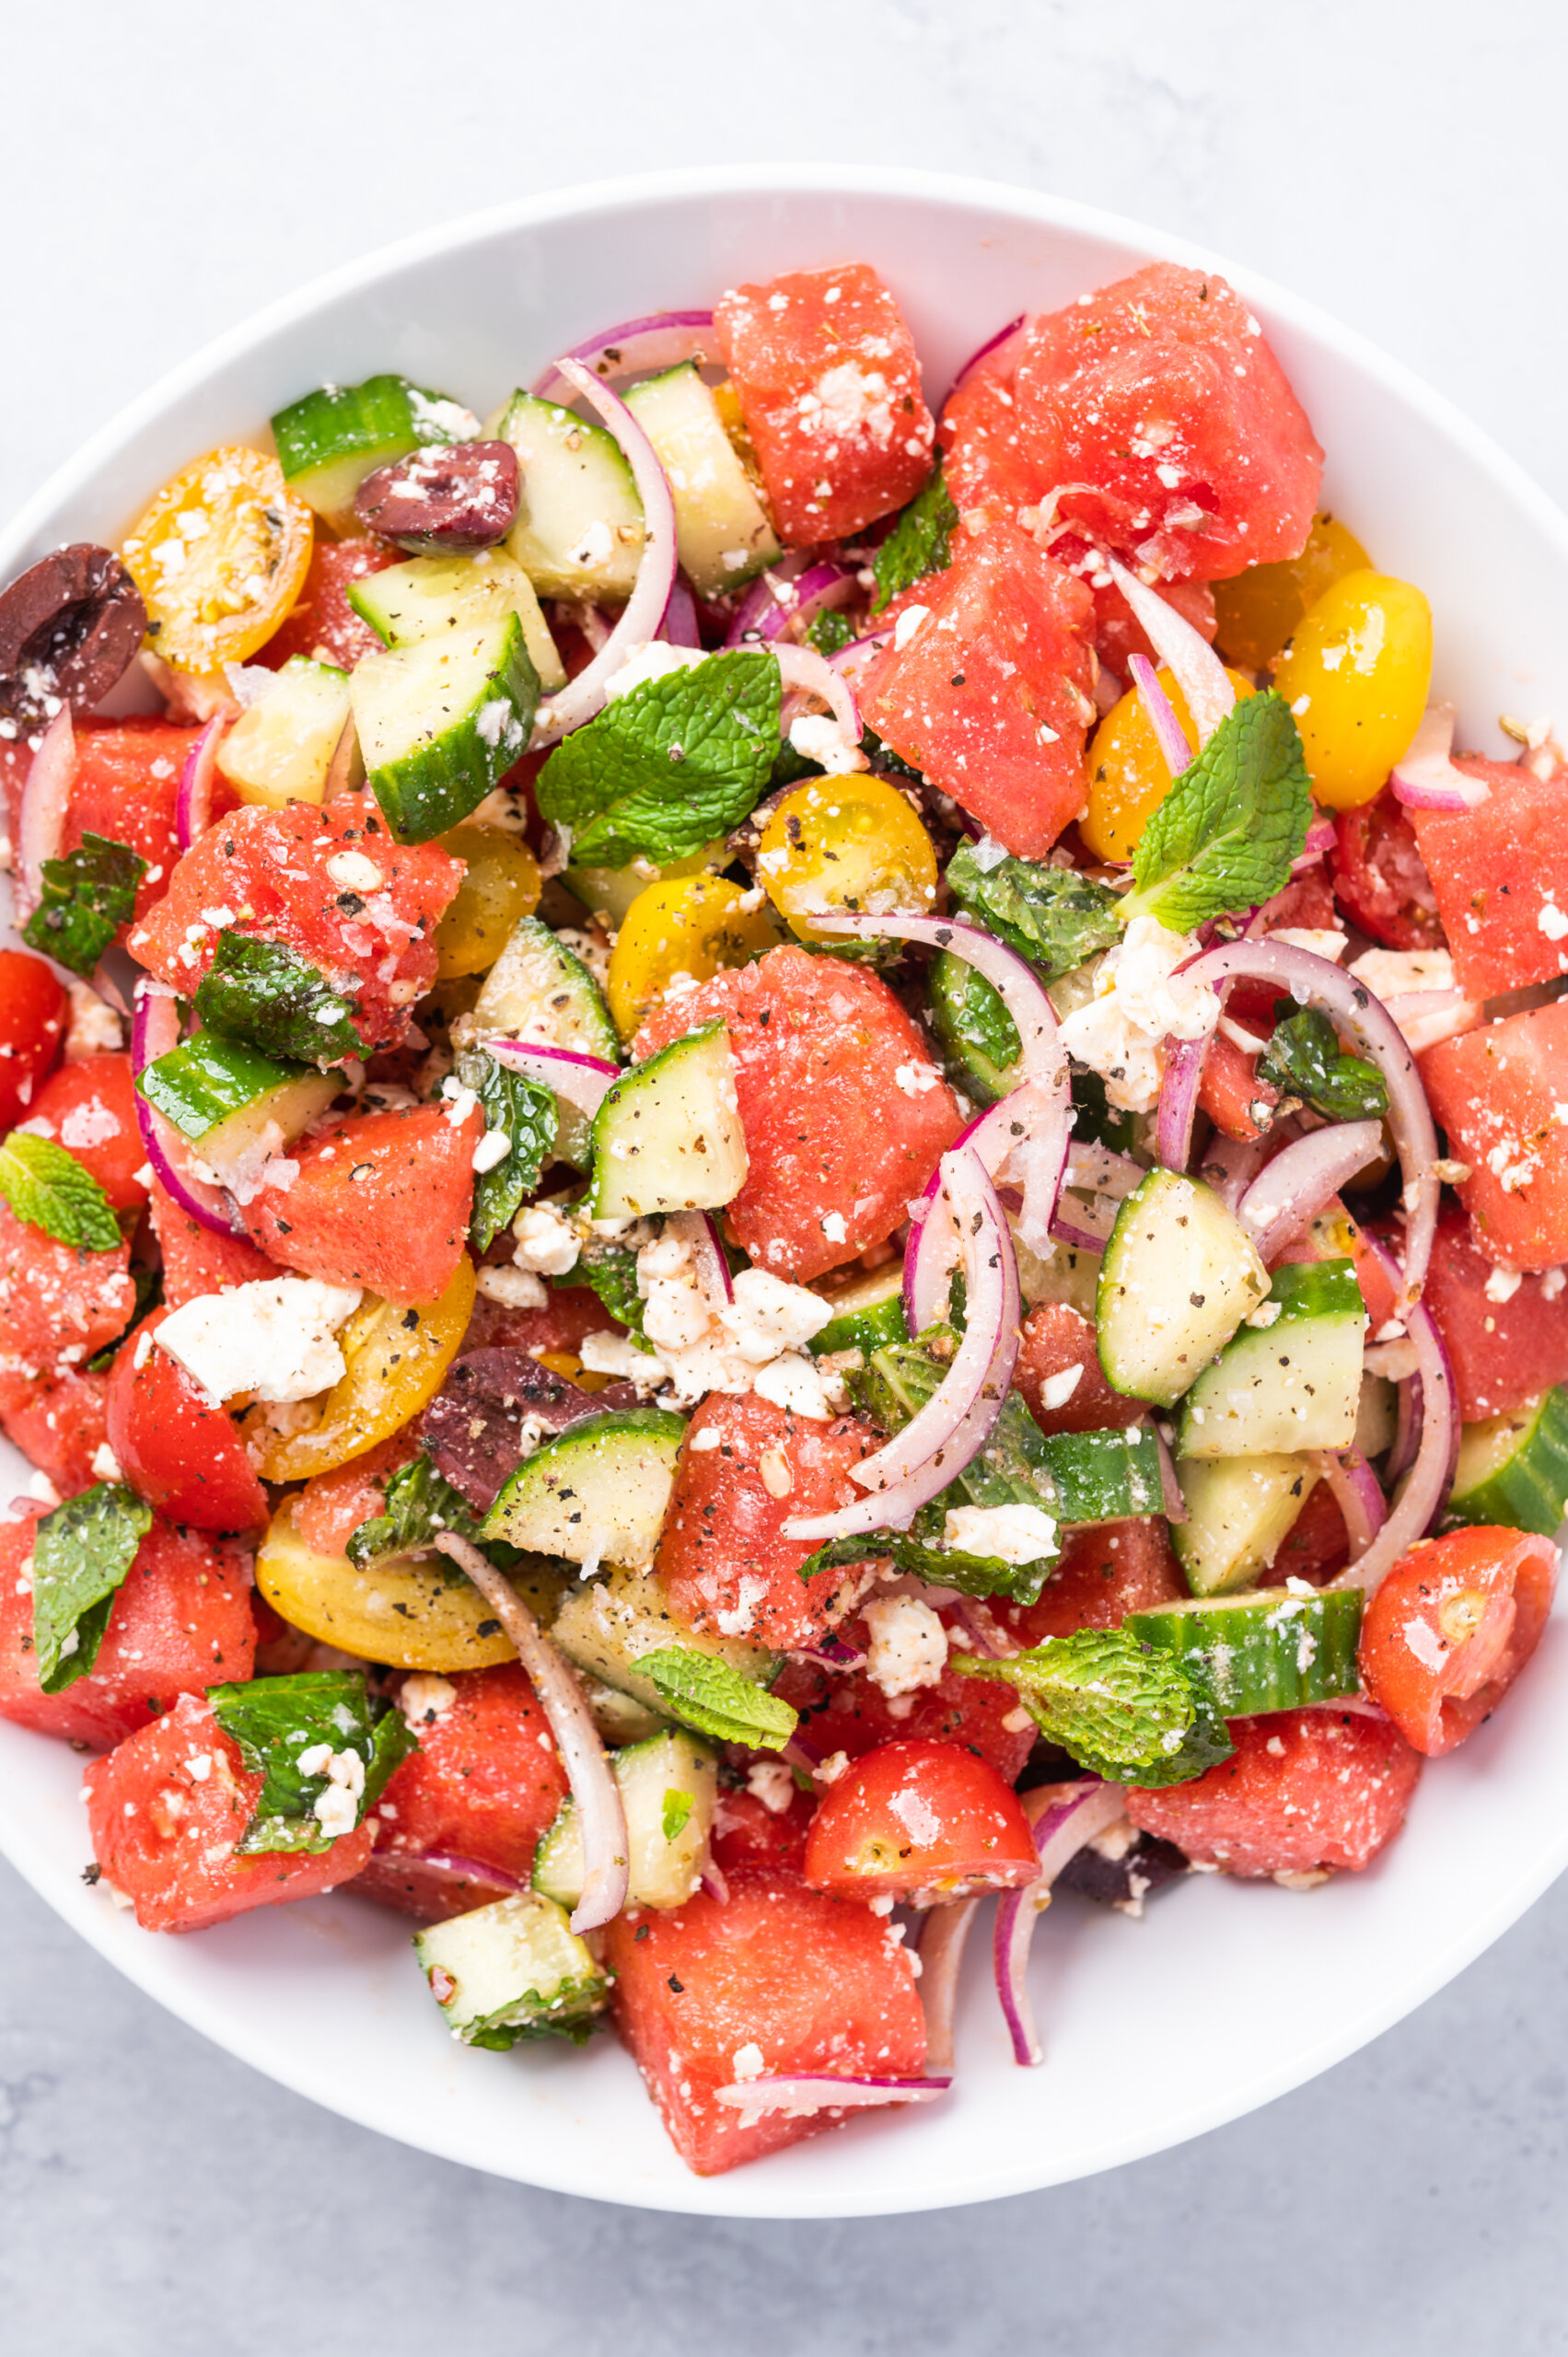 Greek-inspired salad with watermelon, cucumber, tomatoes, red onion, and feta